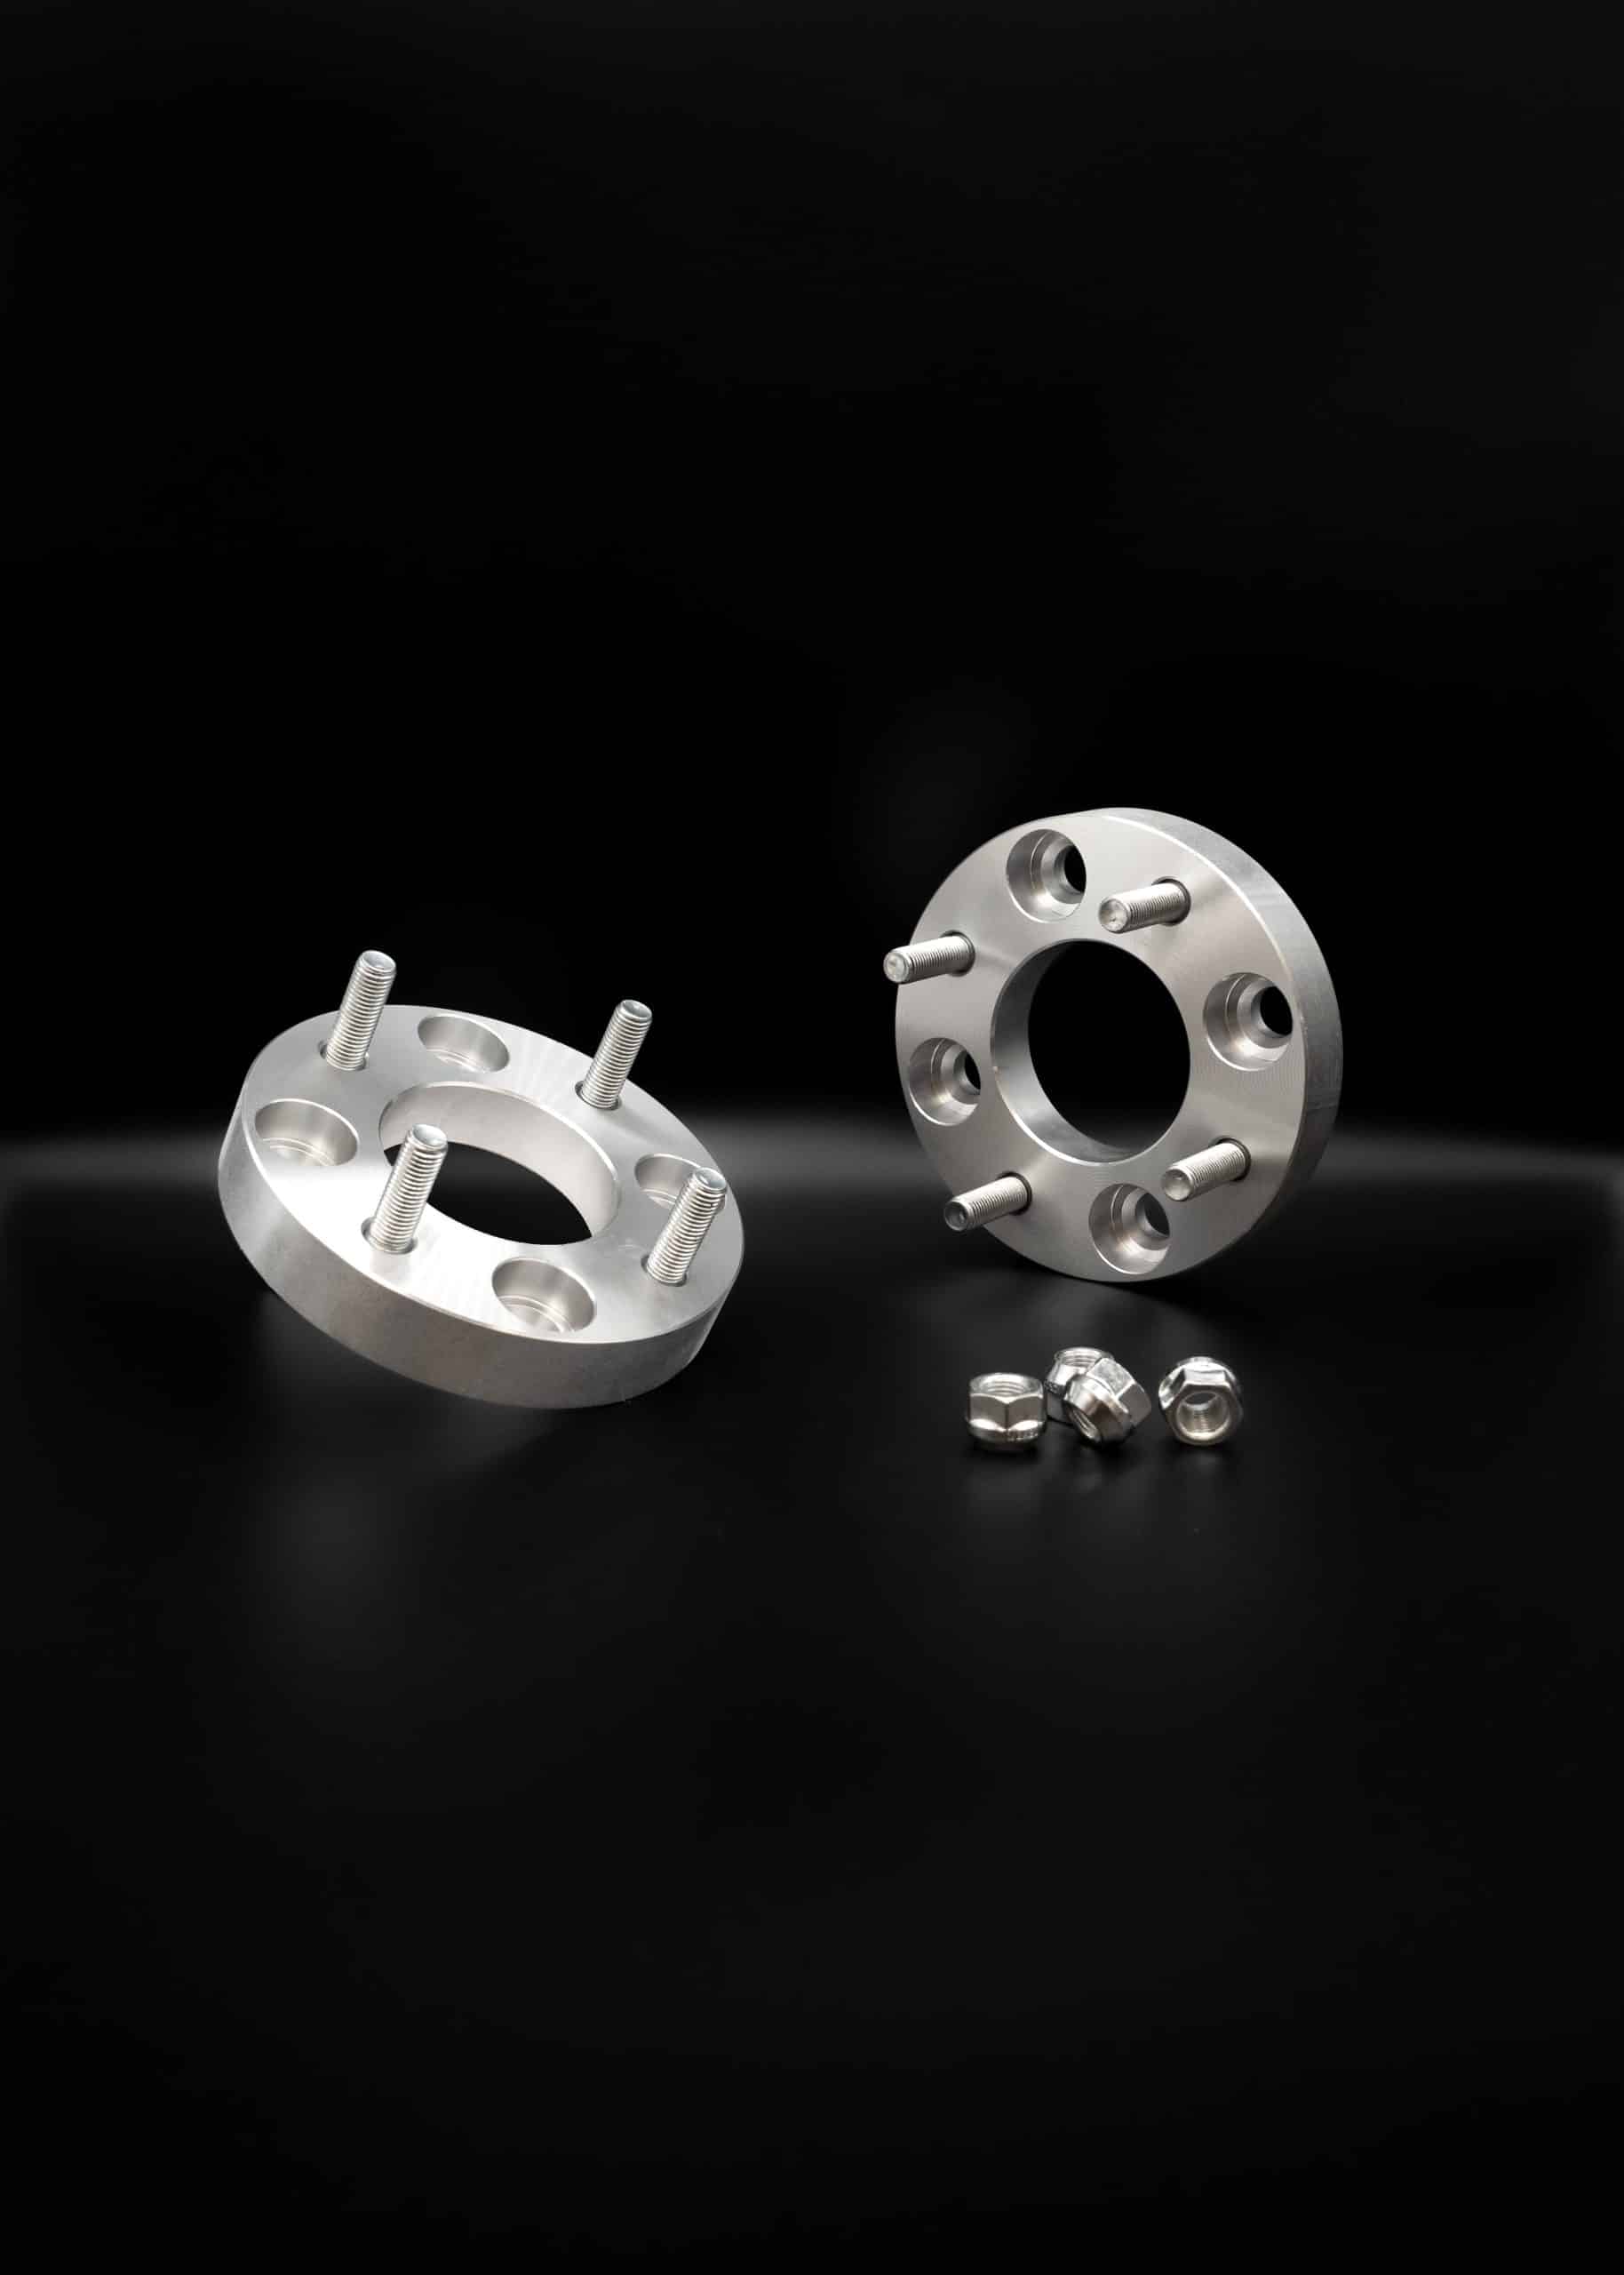 5x108 MM To 5x112 MM Wheel Spacers Hub Centric Conversion For Ford